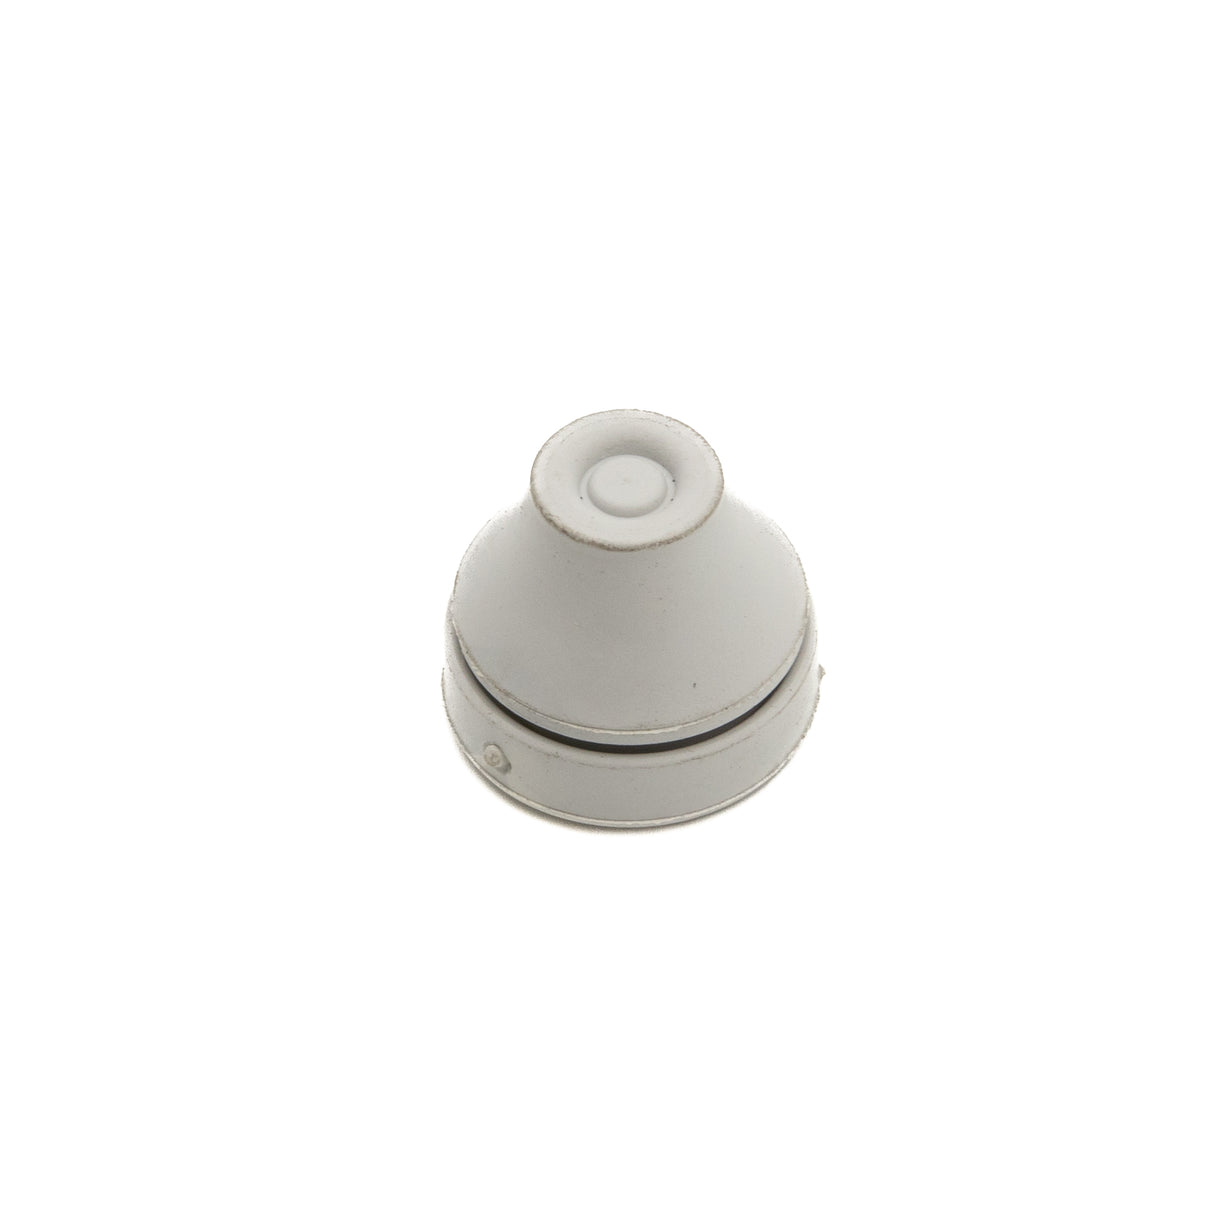 Boxco BC-RG-PG21 Rubber Cable Gland Grommet 29 mm Hole Ivory - PHOTO 1